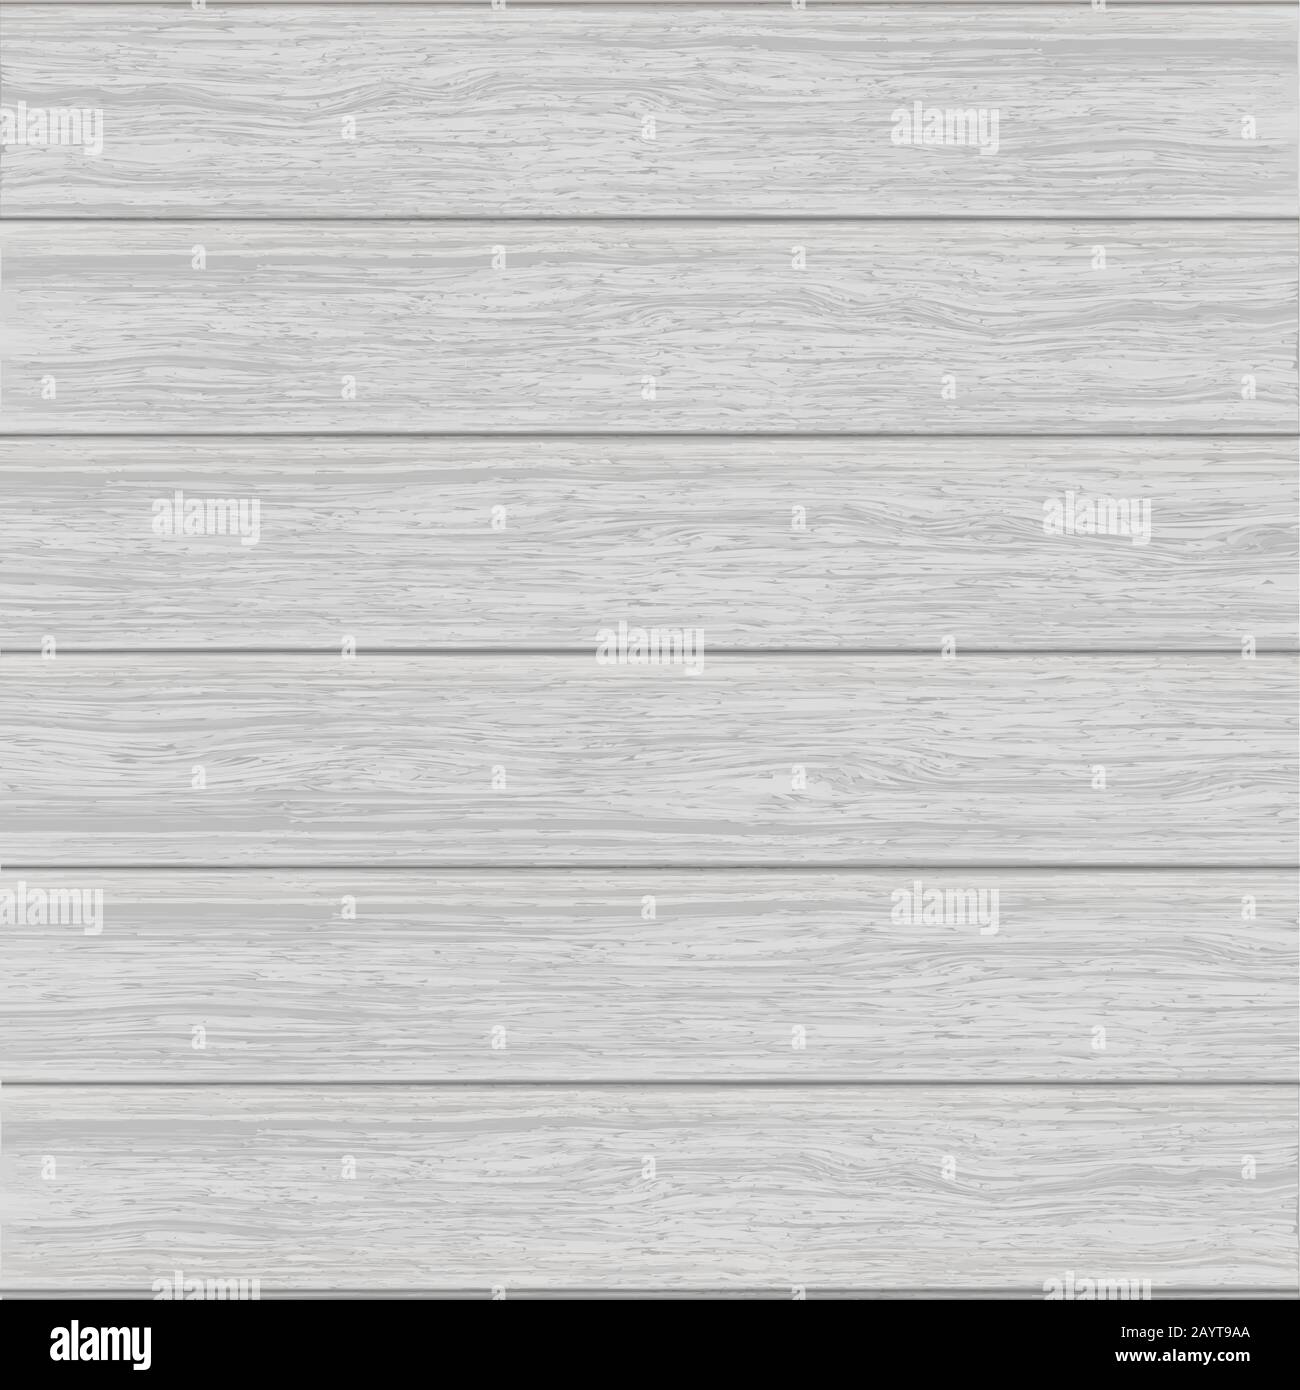 Grayscale Grunge Wooden Plank Textured Wall Background. Stock Vector